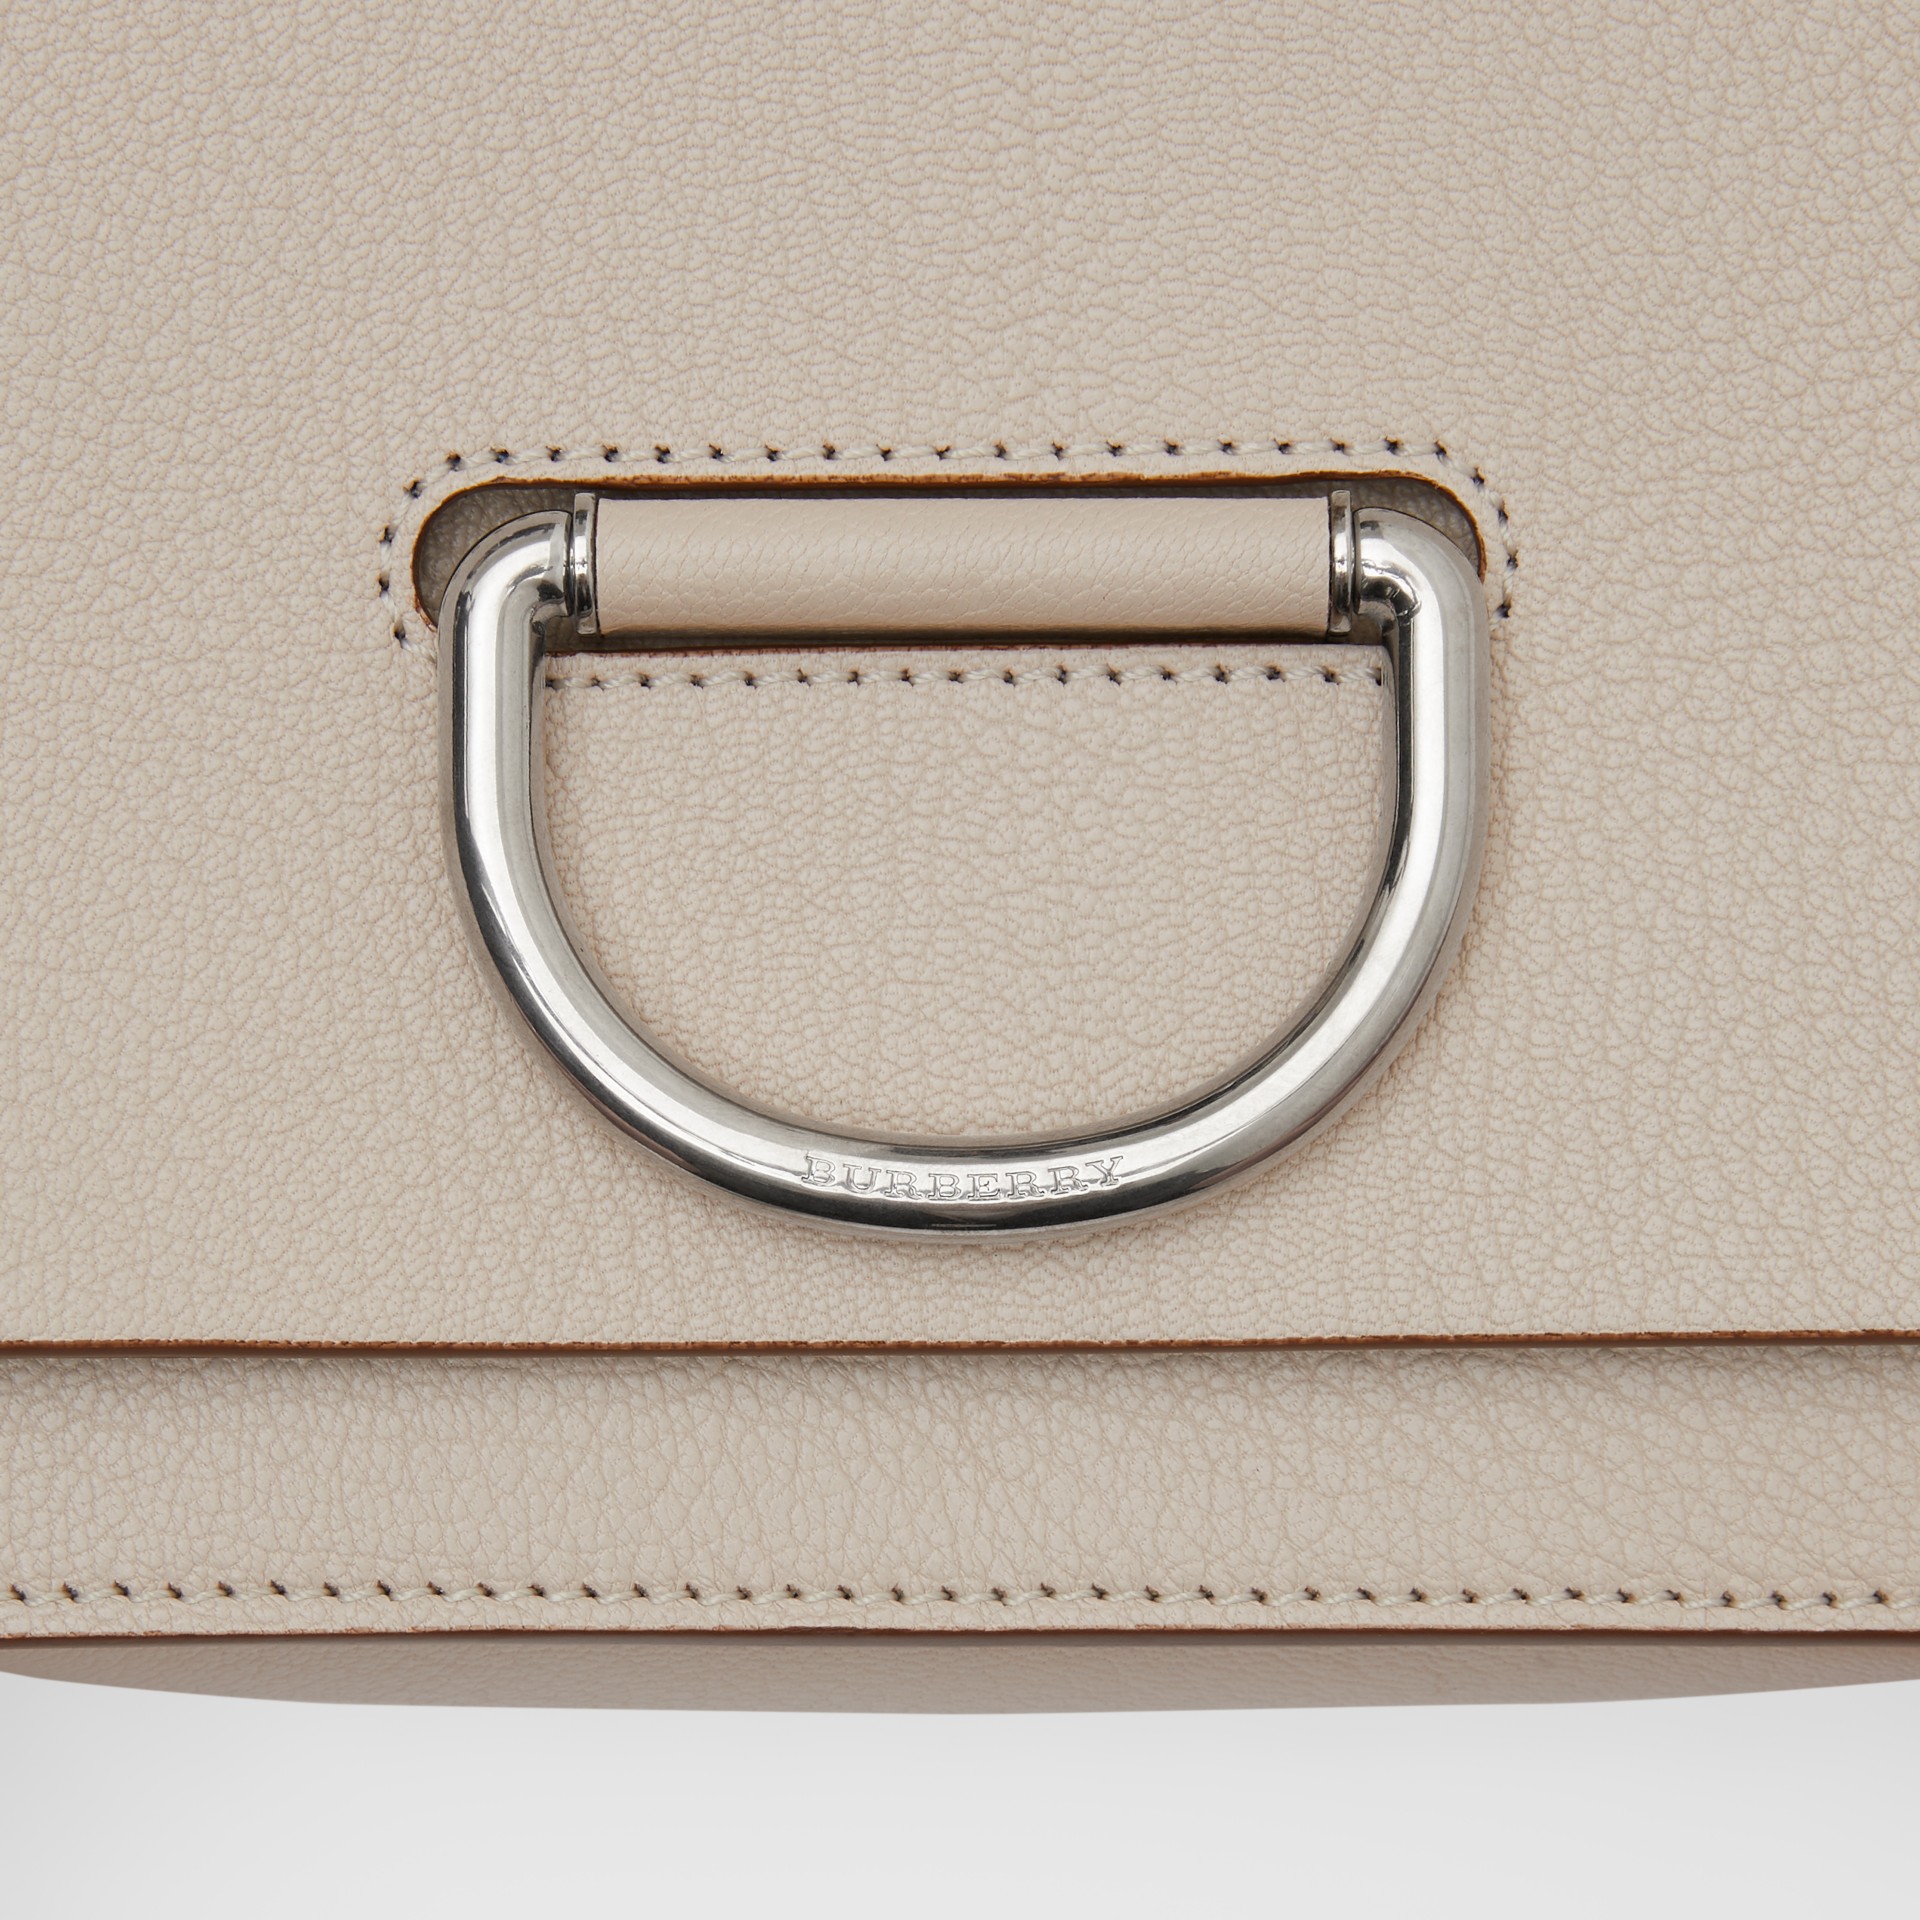 The Small Leather D-ring Bag in Stone - Women | Burberry United States